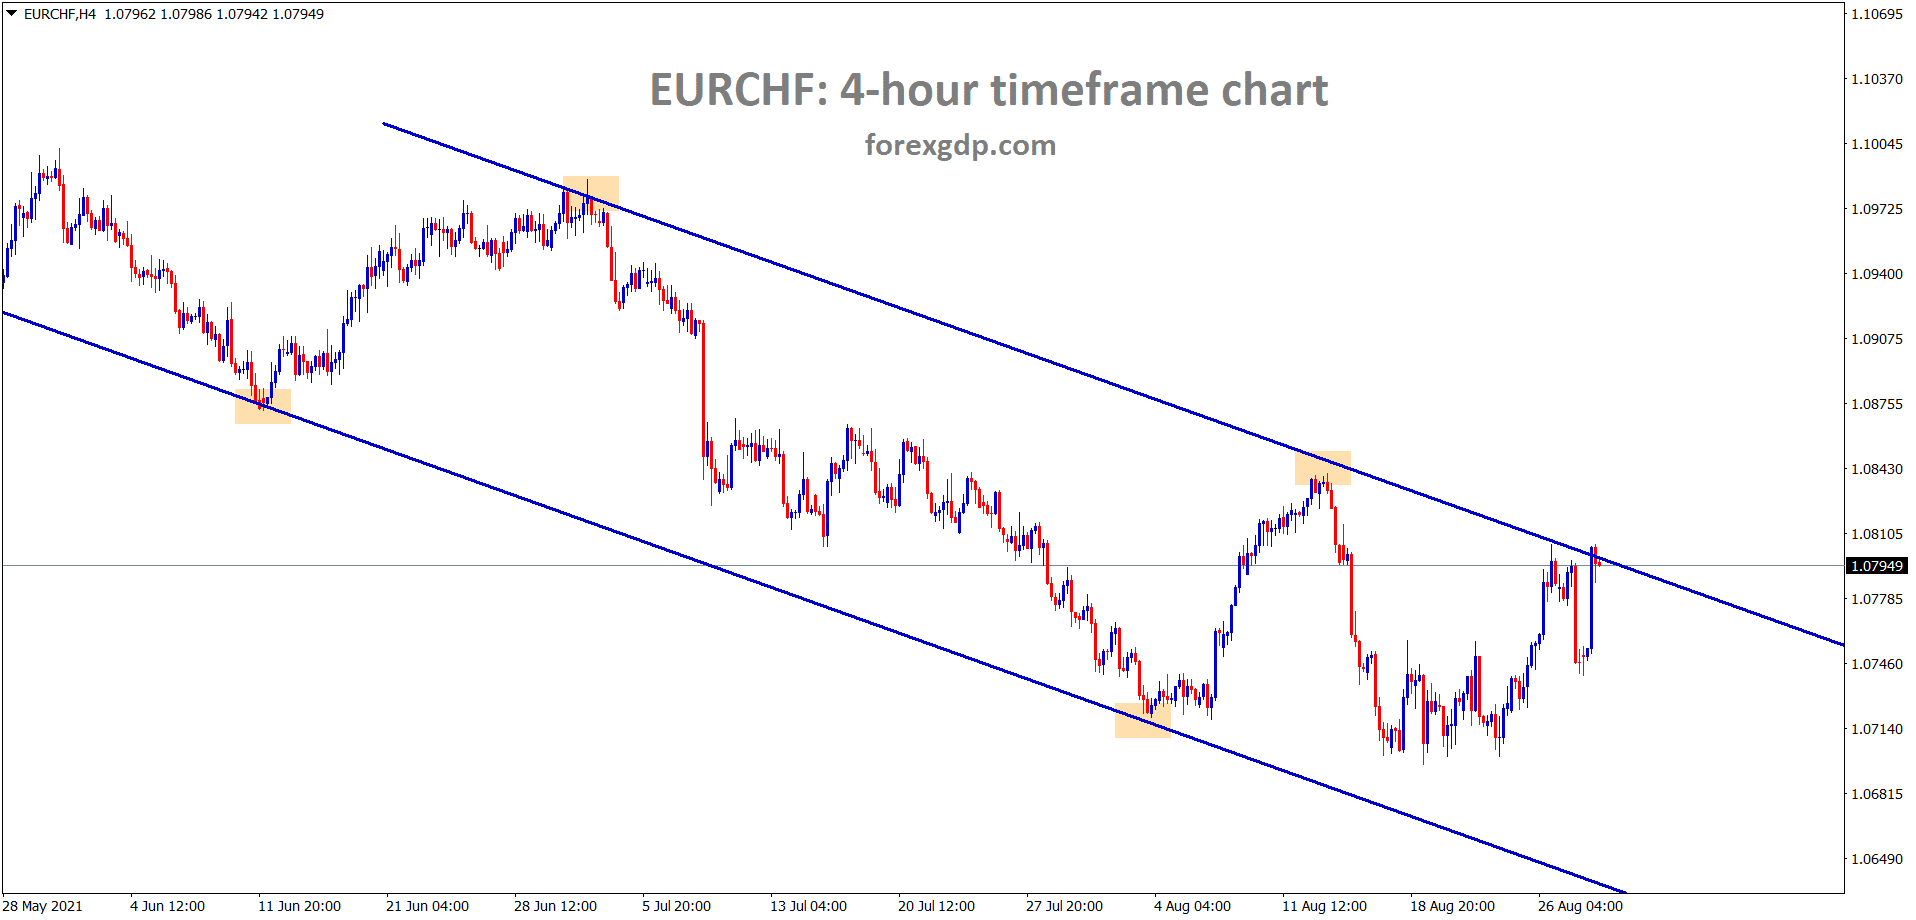 EURCHf reached the lower high area again in the desending channel wait for breakout or reversal